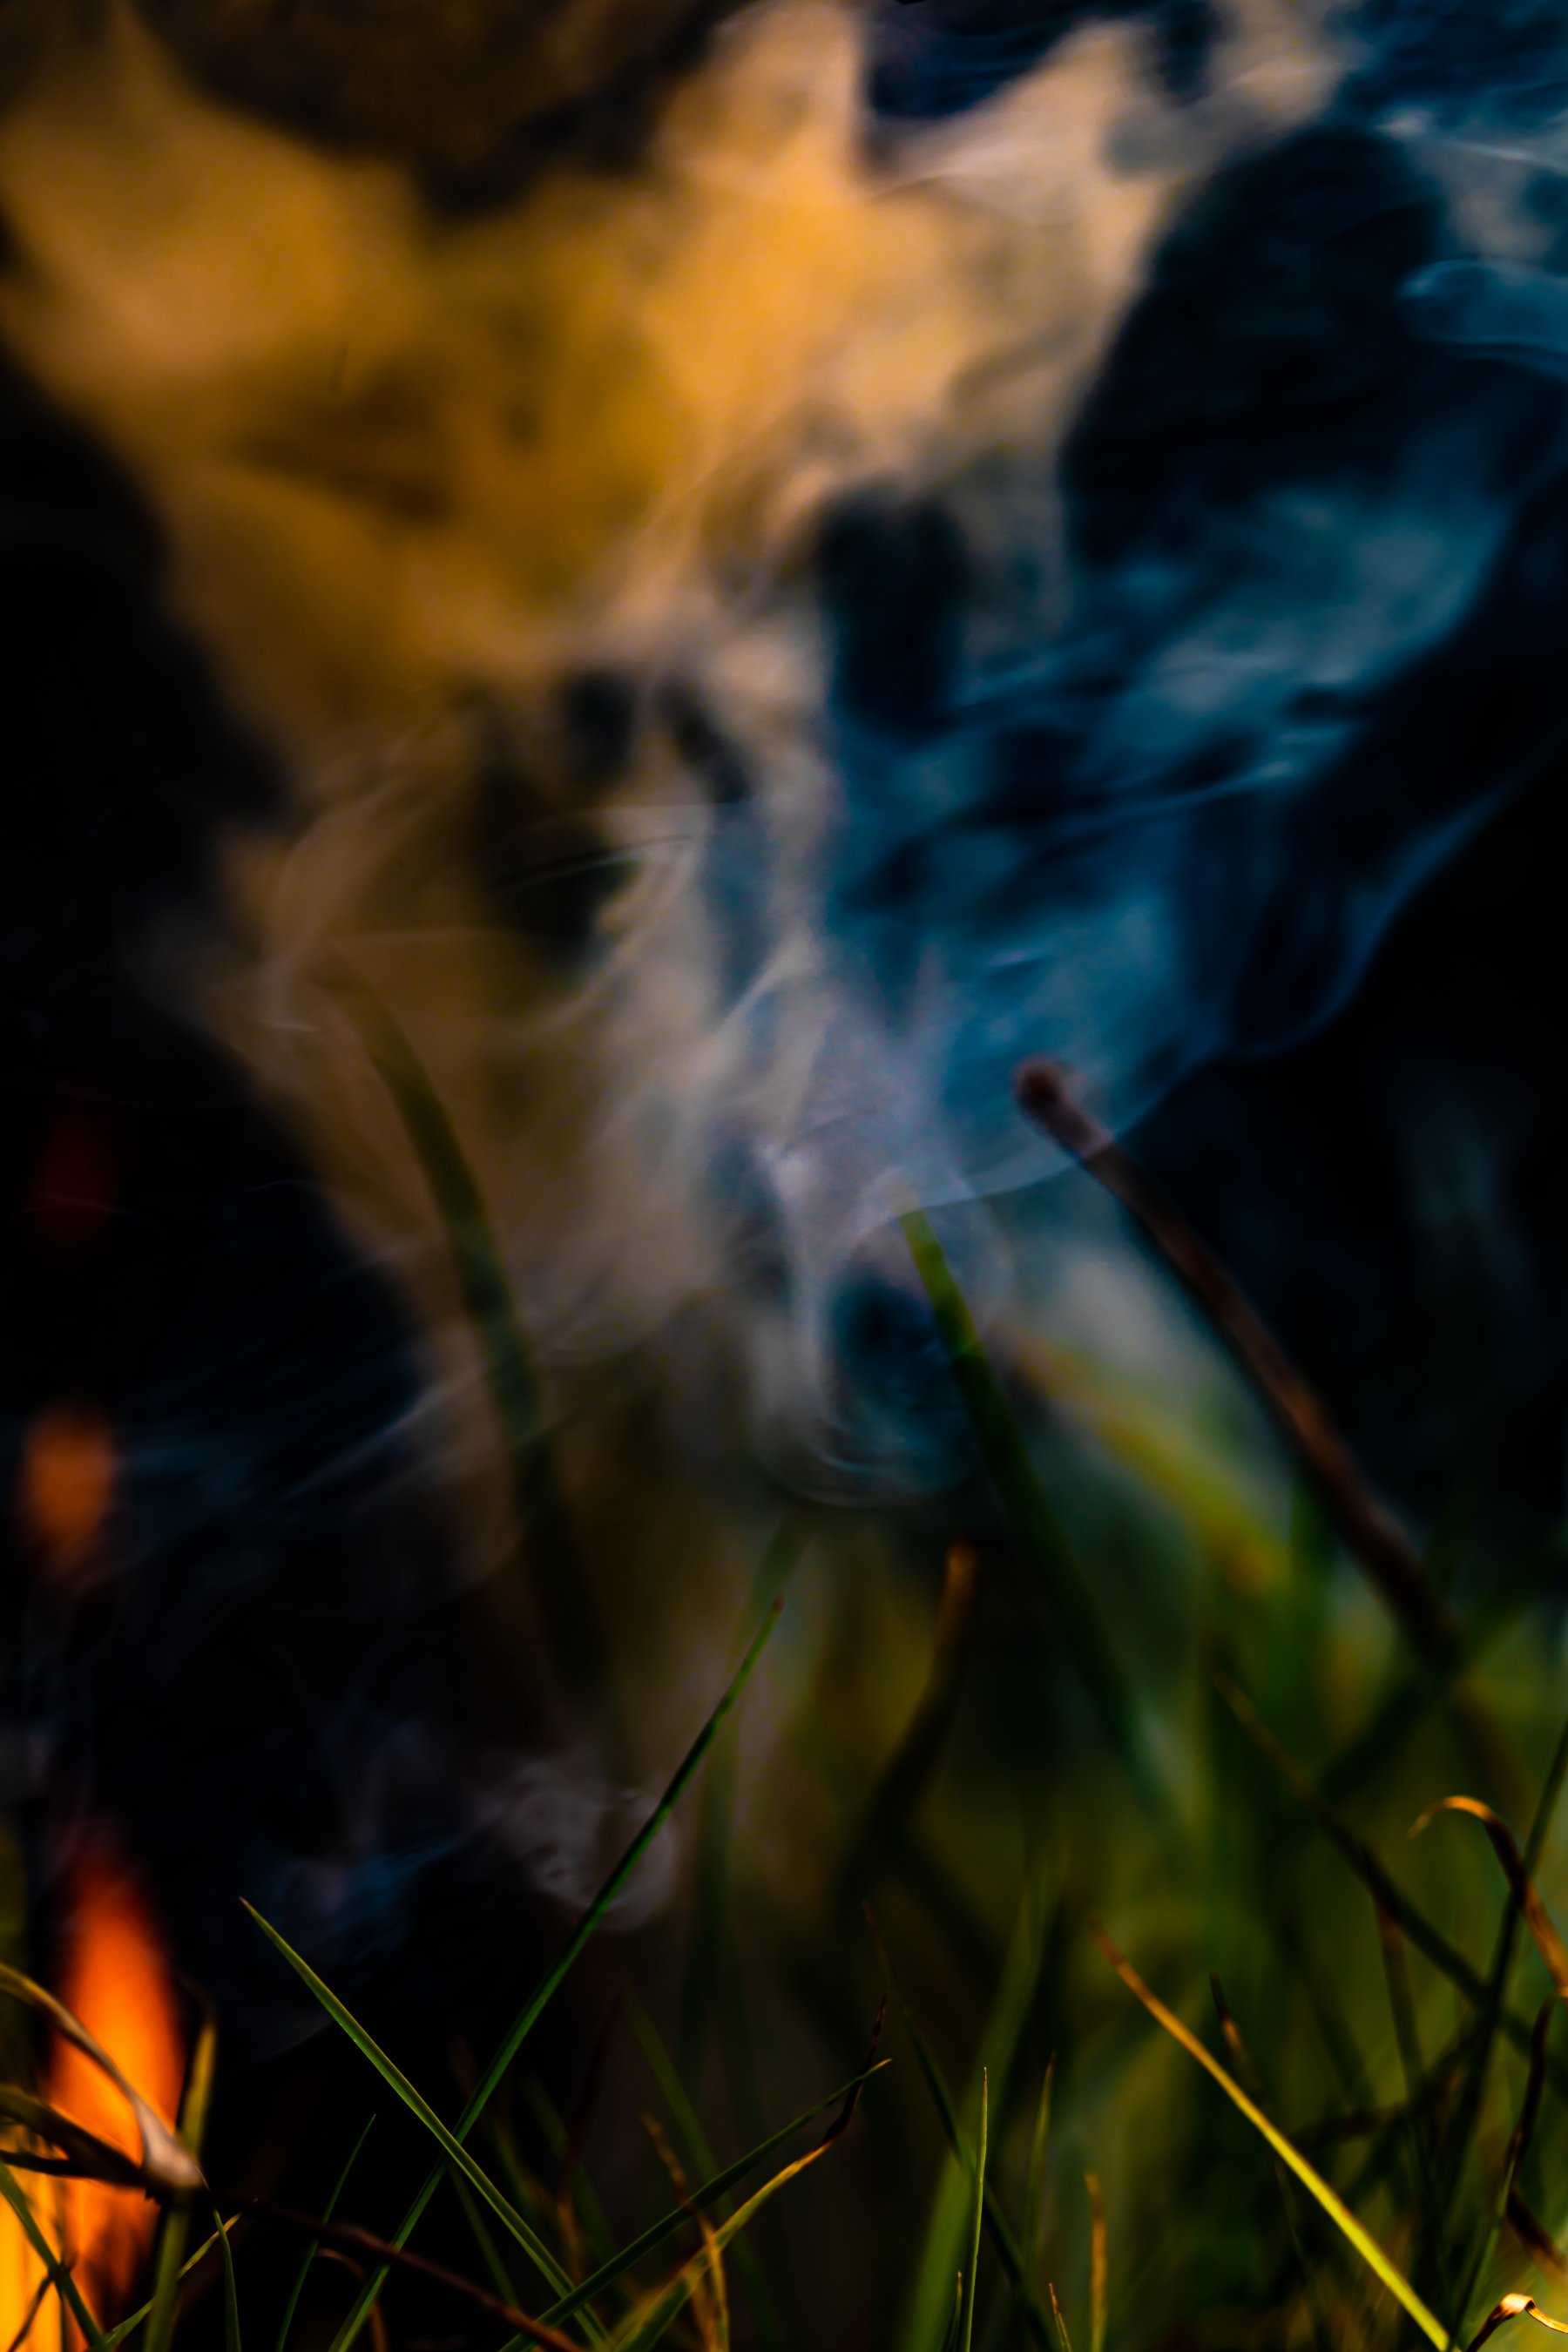 The exploration of fire and a changing environment through a macro lens